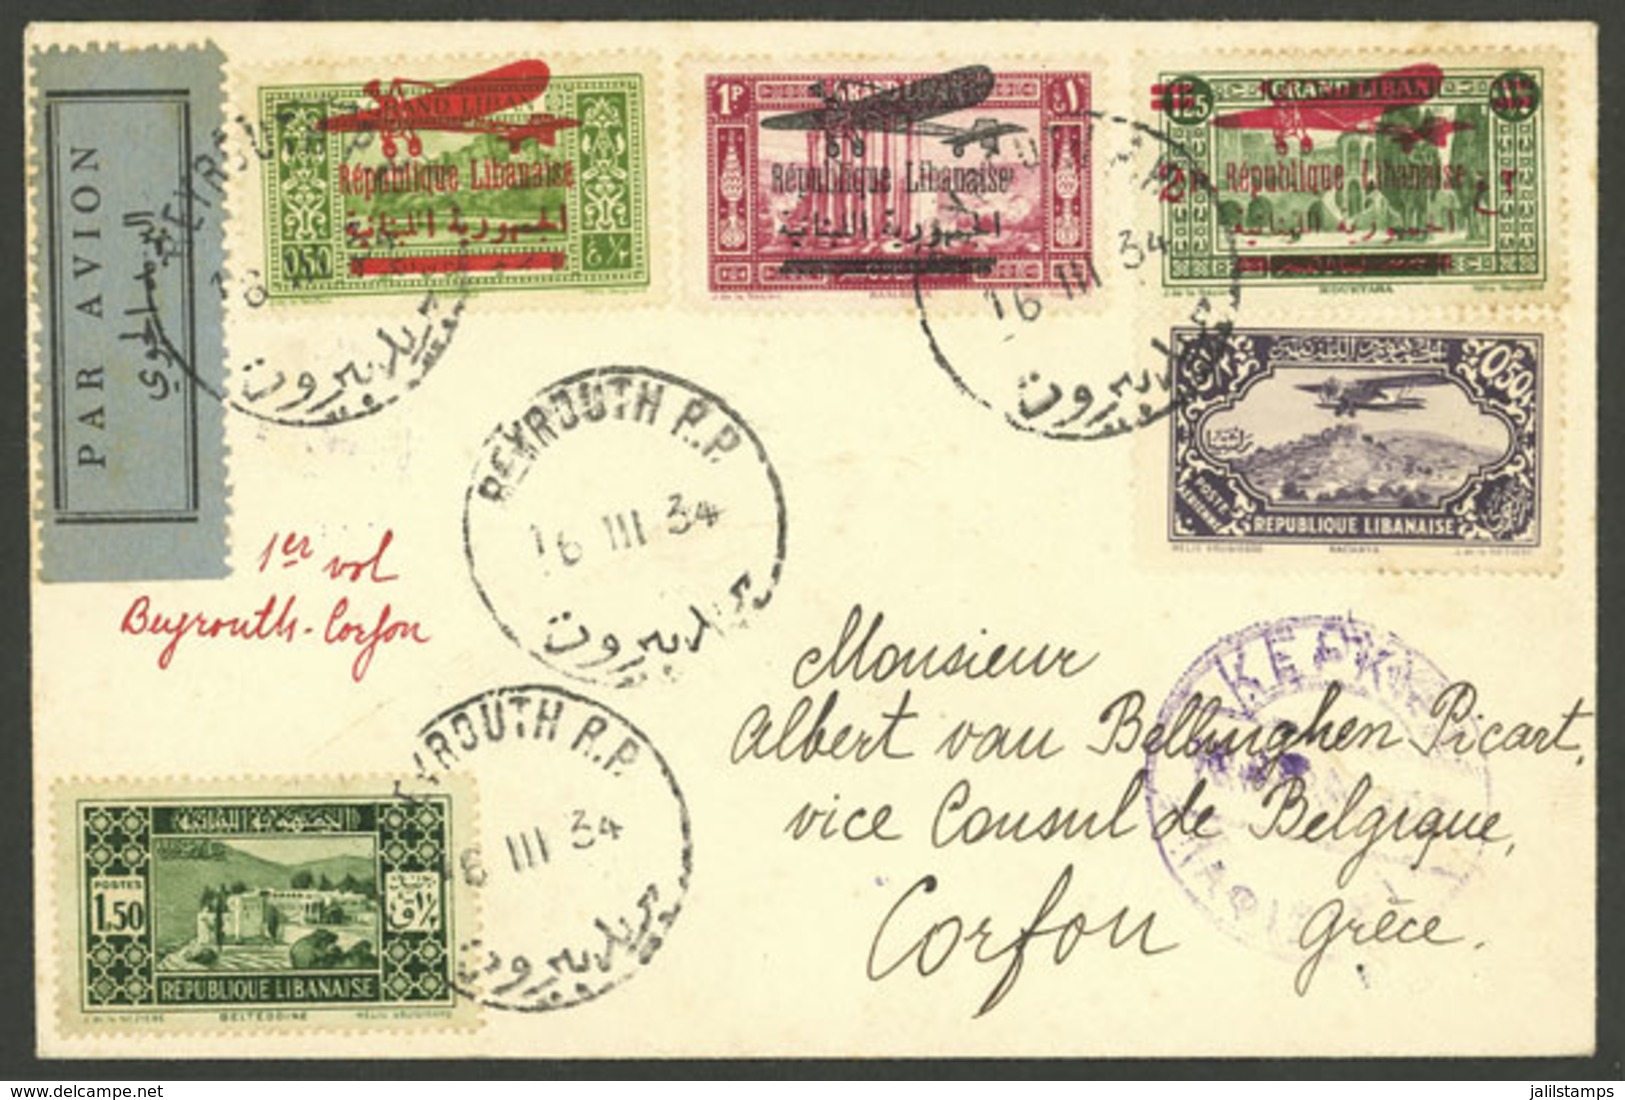 LEBANON: 16/MAR/1934 Beyrouth - Corfu (Greece), First Flight, Cover With Very Nice Postage And Arrival Marks On Front An - Libanon